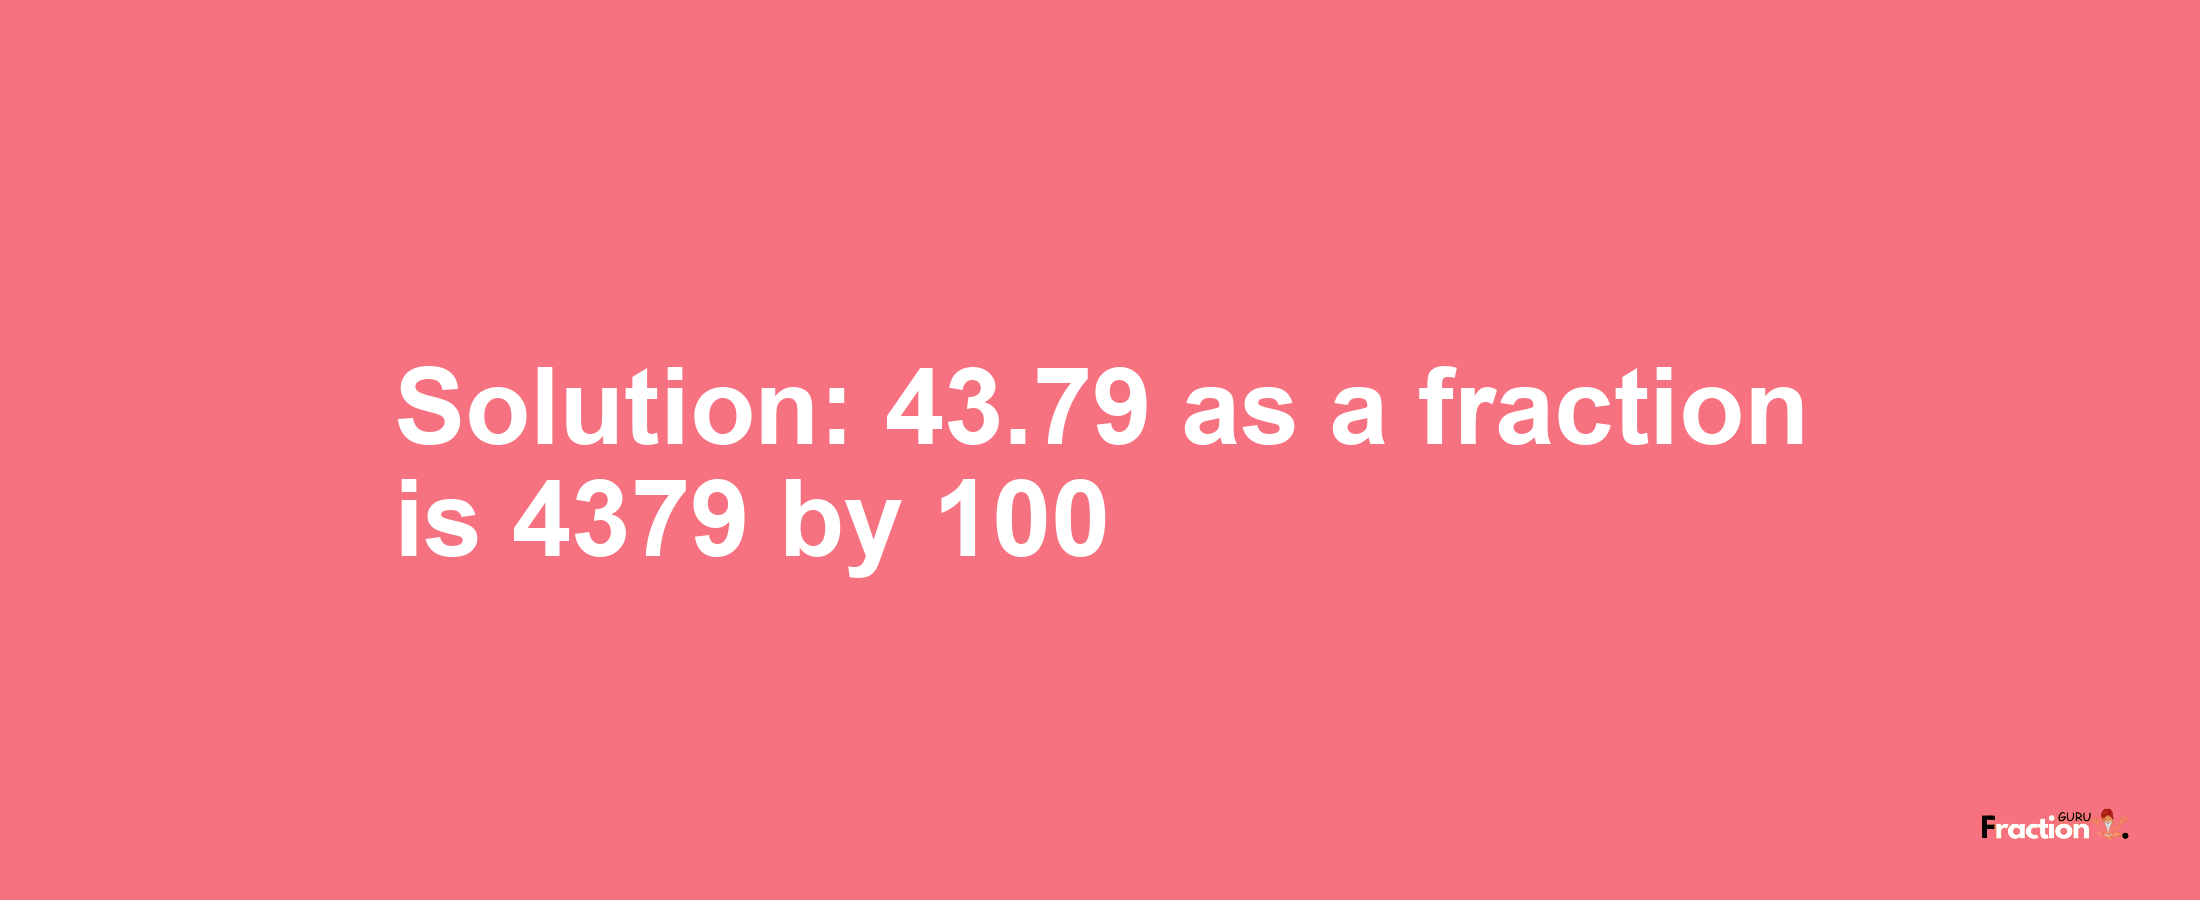 Solution:43.79 as a fraction is 4379/100